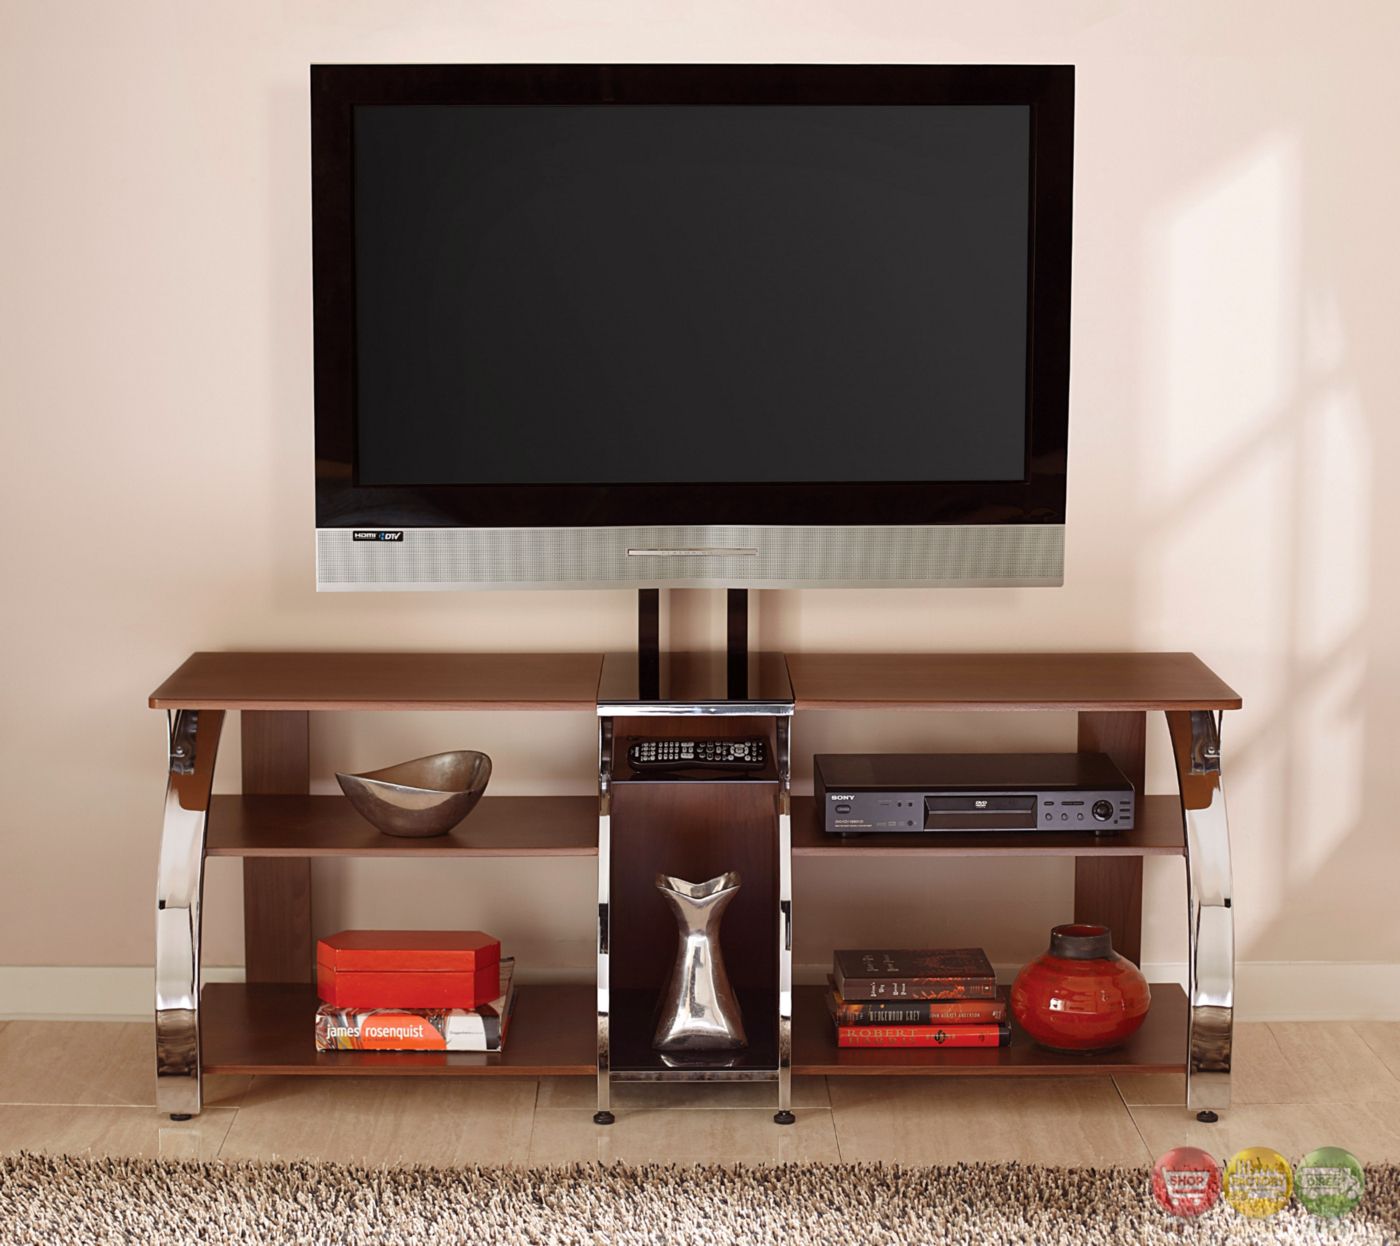 Layla 58" Polished Chrome And Cherry Tv Stand With Tv With Regard To Bracketed Tv Stands (View 12 of 15)